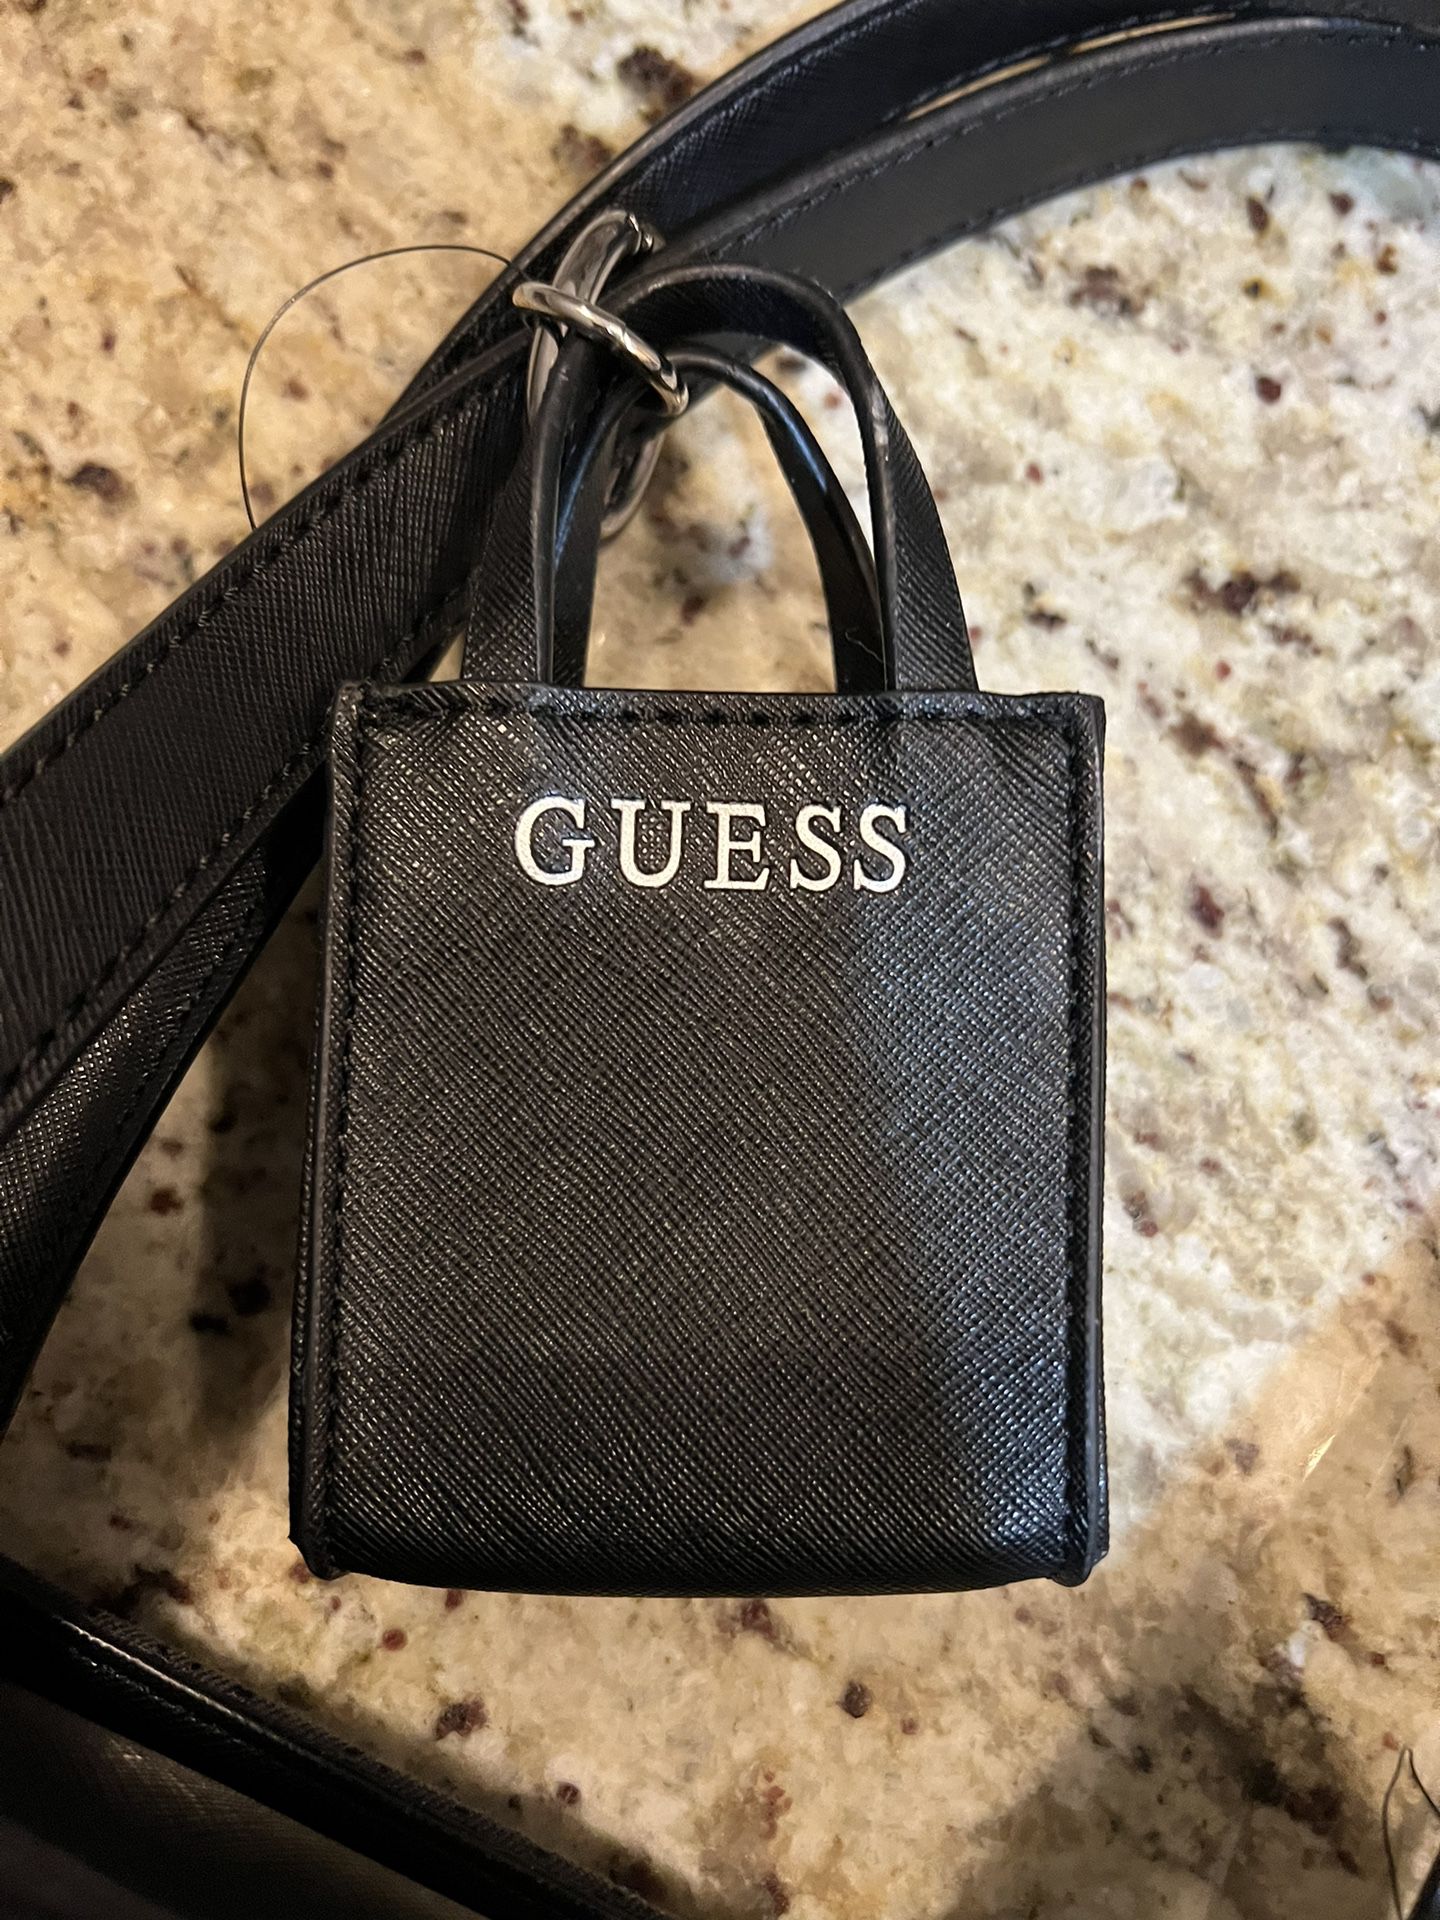 NEW GUESS Bag With Matching Wallet!! for Sale in Babylon, NY